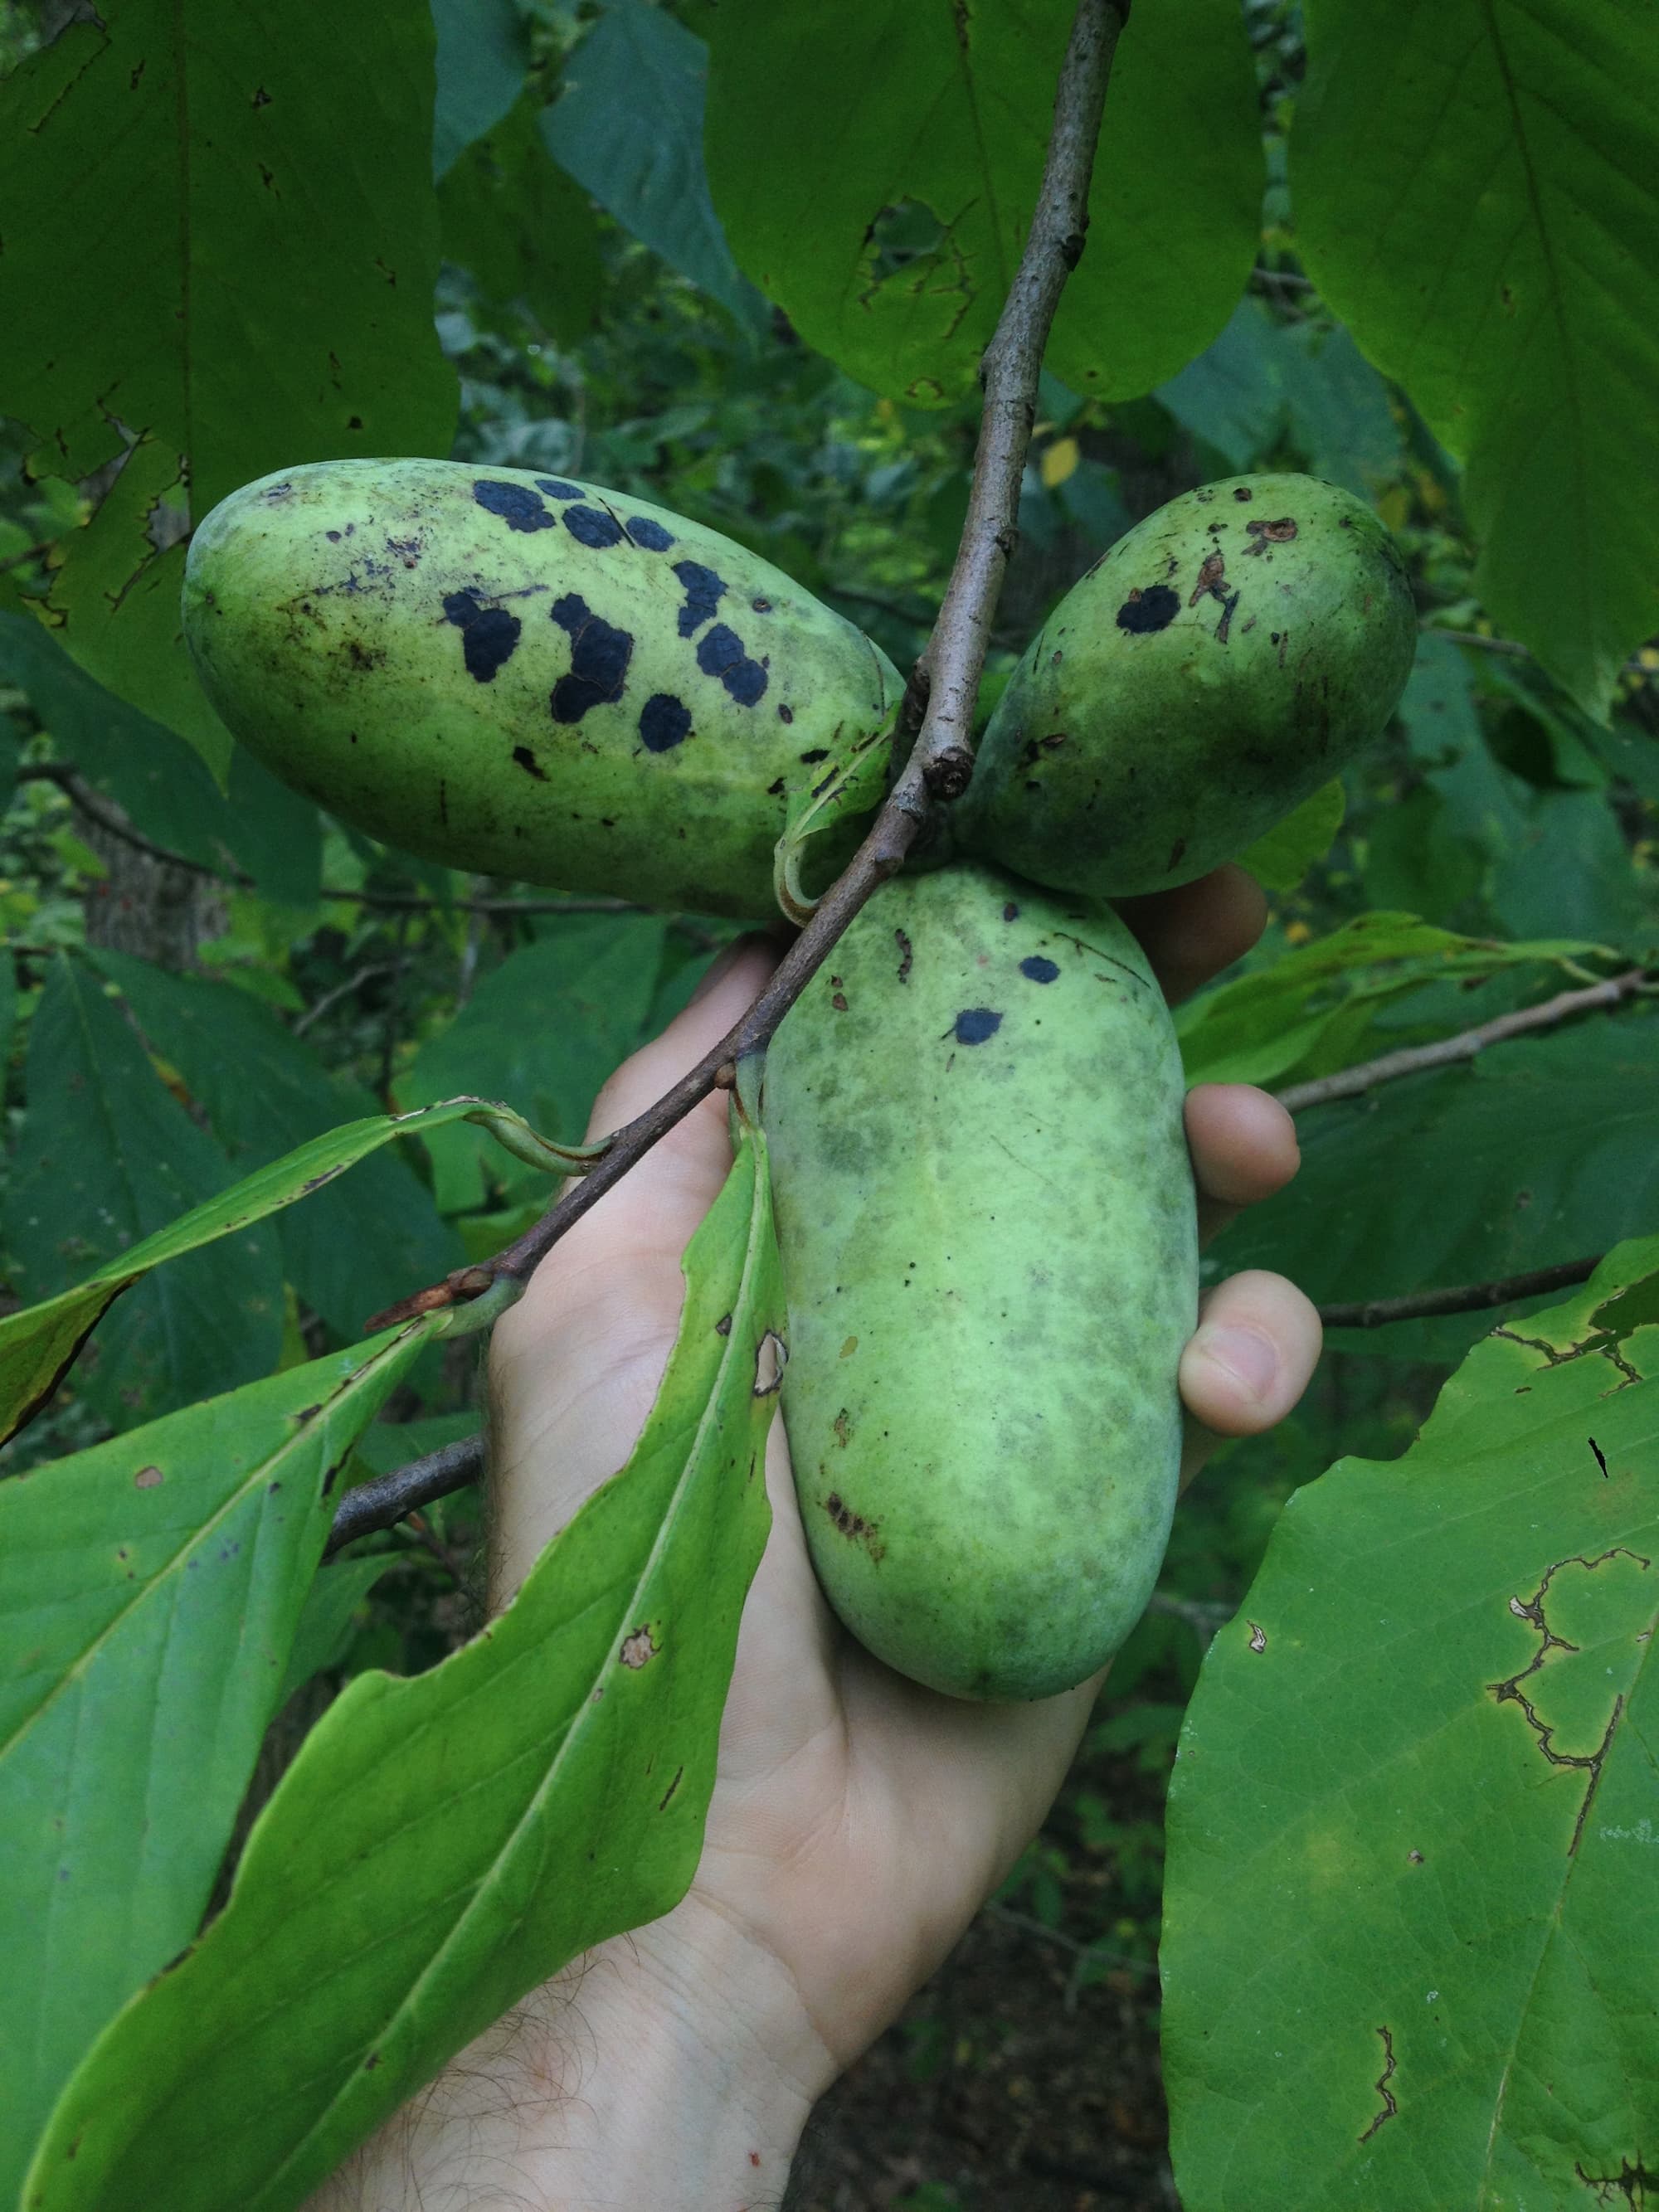 Pawpaw fruits can be difficult to spot while still in the tree—unless they happen to be hanging at eye level!